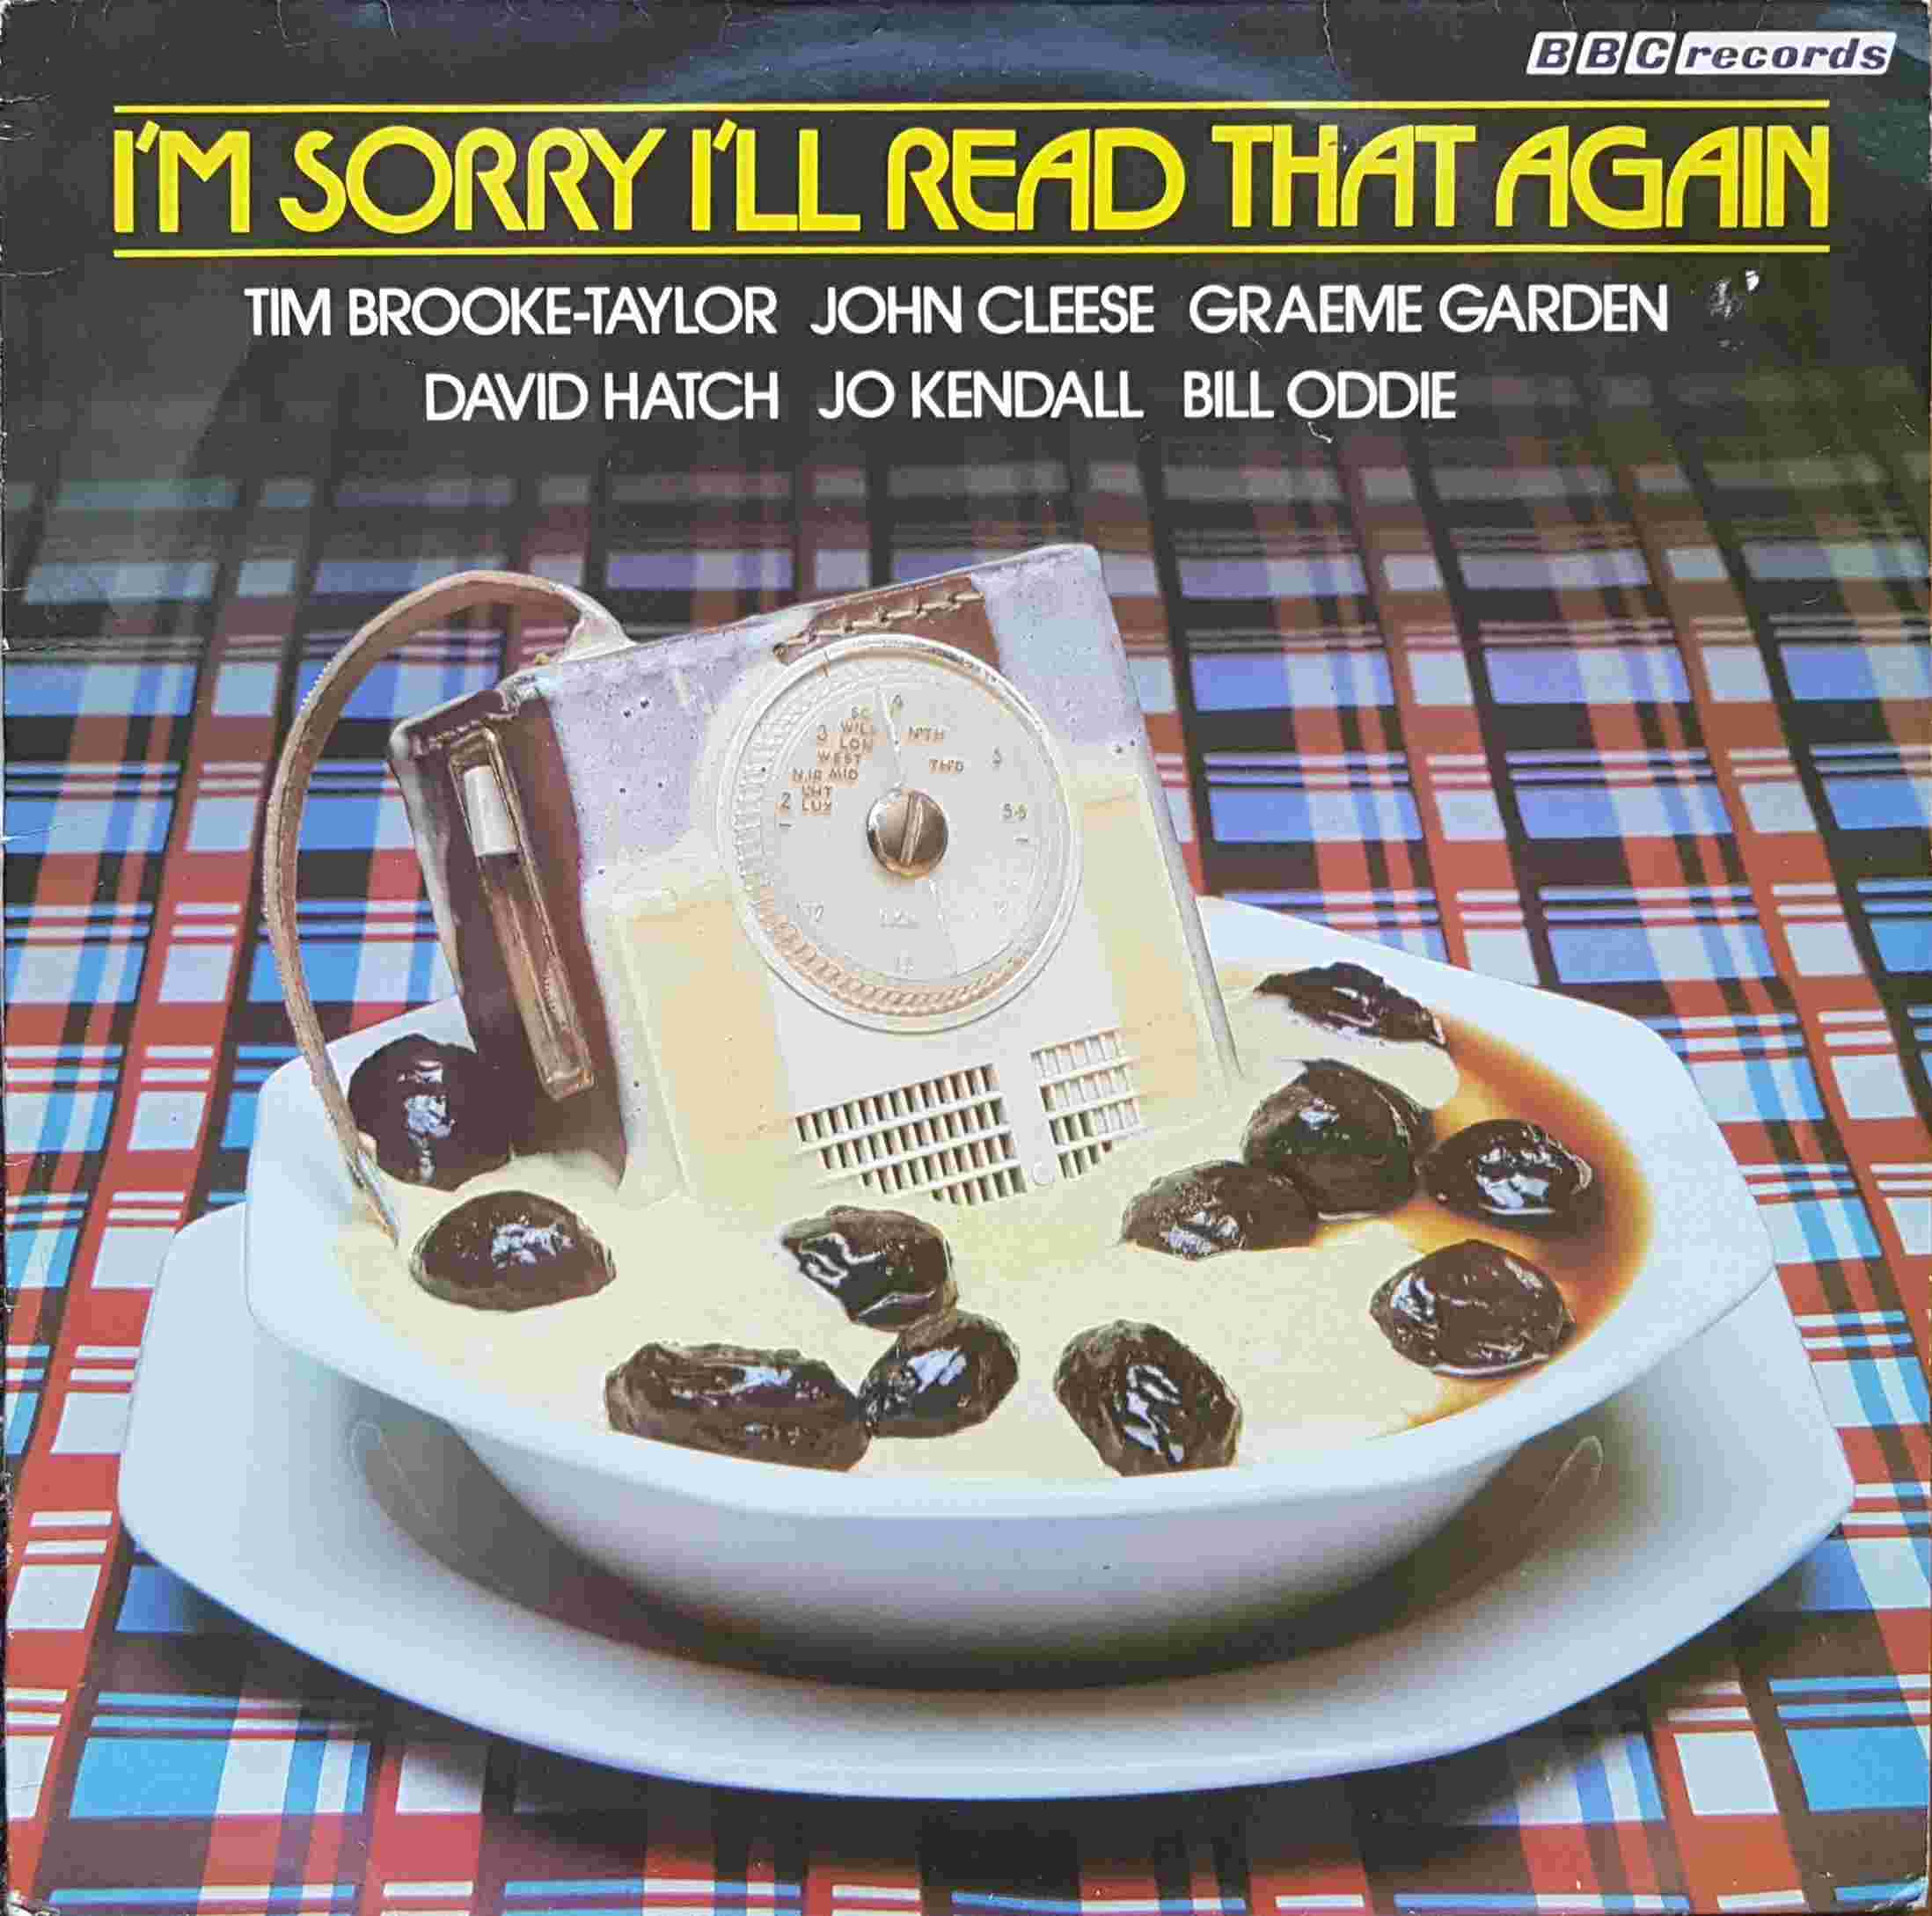 Picture of REH 342 I'm sorry, I'll read that again by artist Tim Brooke-Taylor / John Cleese / Graeme Garden / David Hatch / Jo Kendall / Bill Oddie from the BBC records and Tapes library